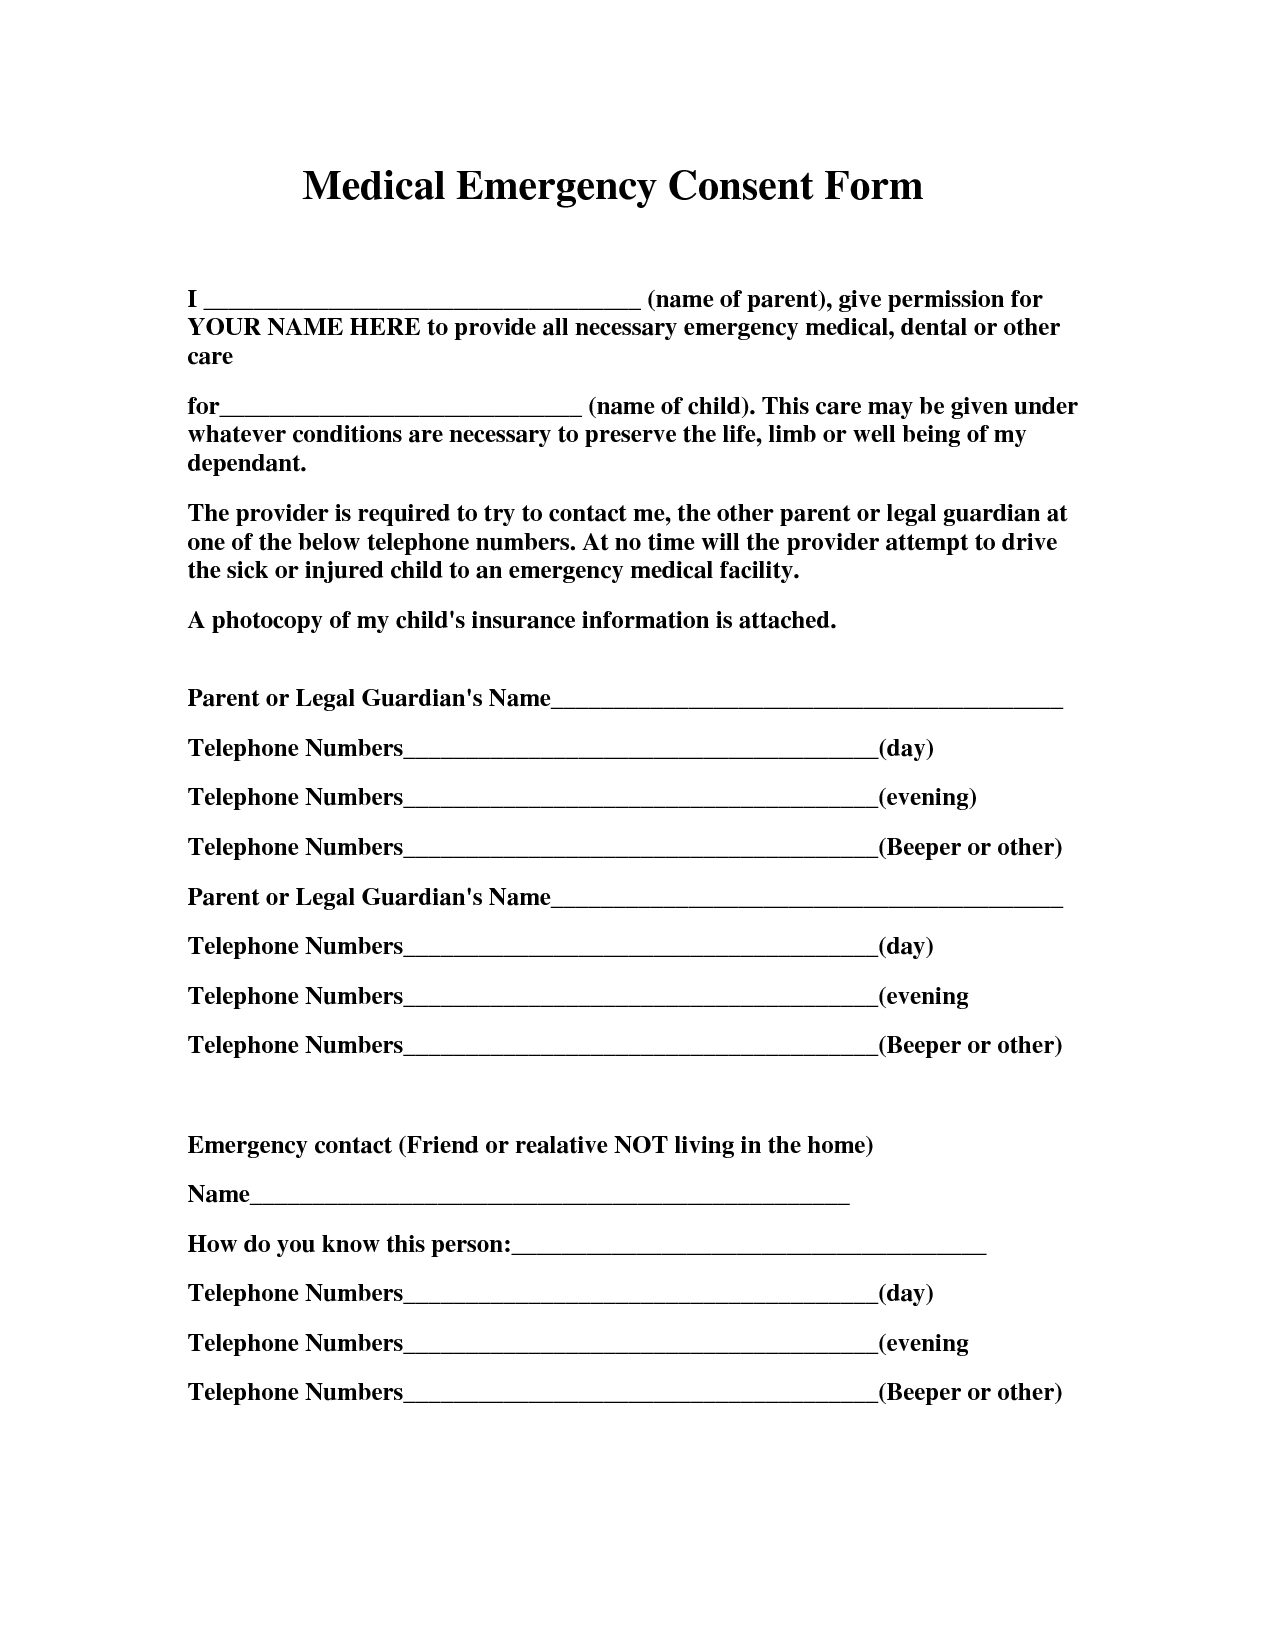 emergency-medical-consent-form-free-printable-documents